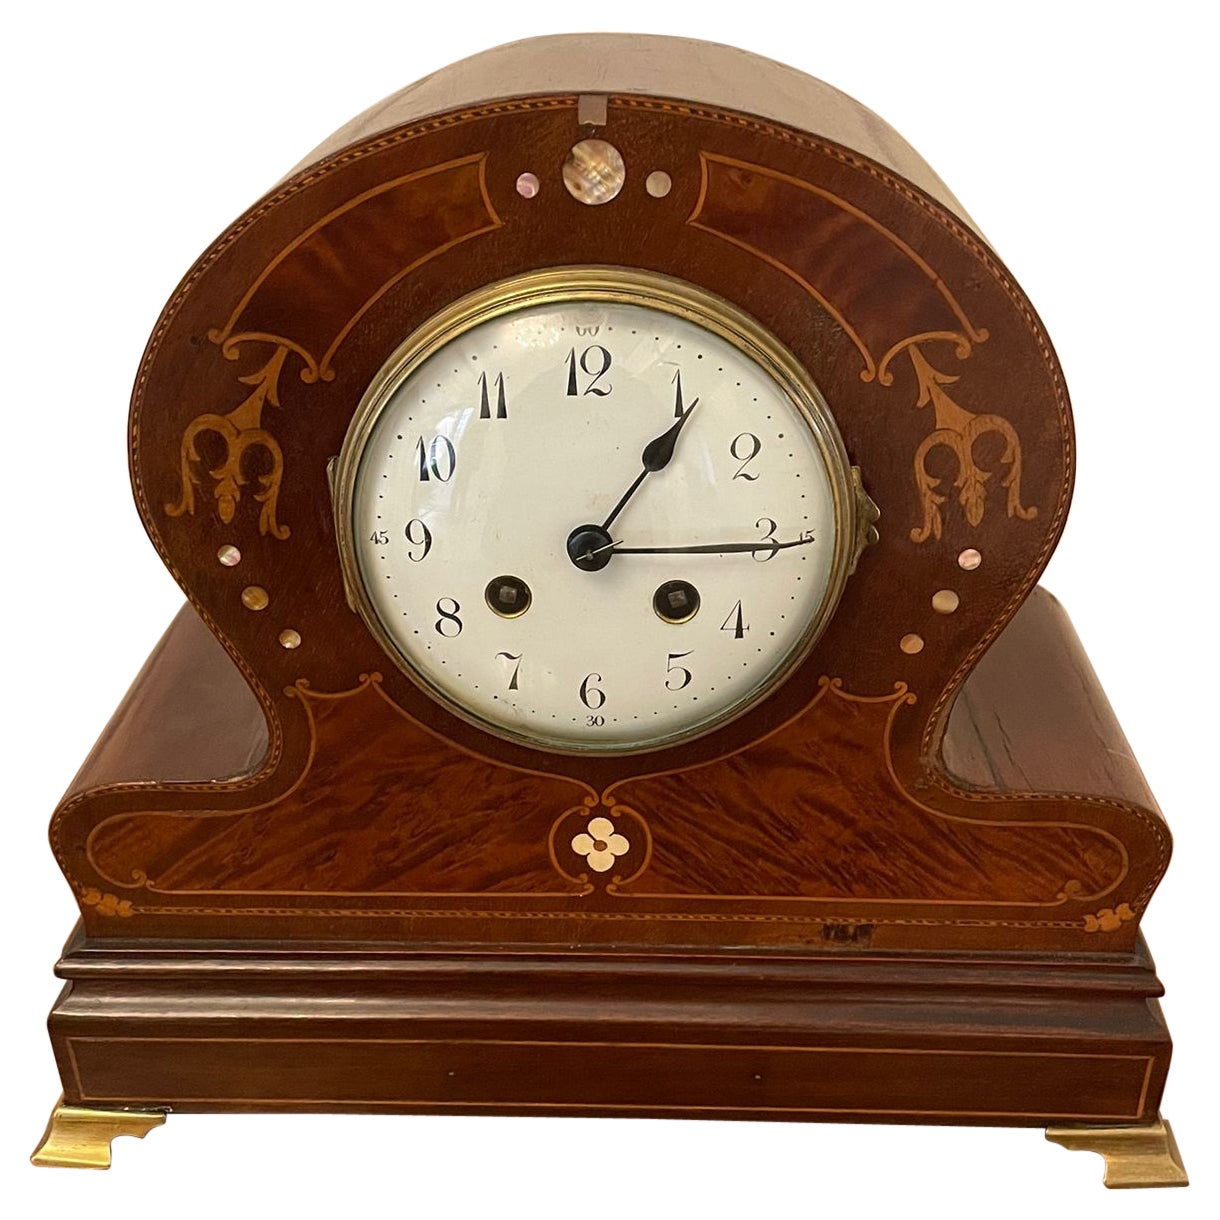 Details about   FatherDay Classic Wooden Compass Base Mantle Table Clock Victorian Desk Ornam 